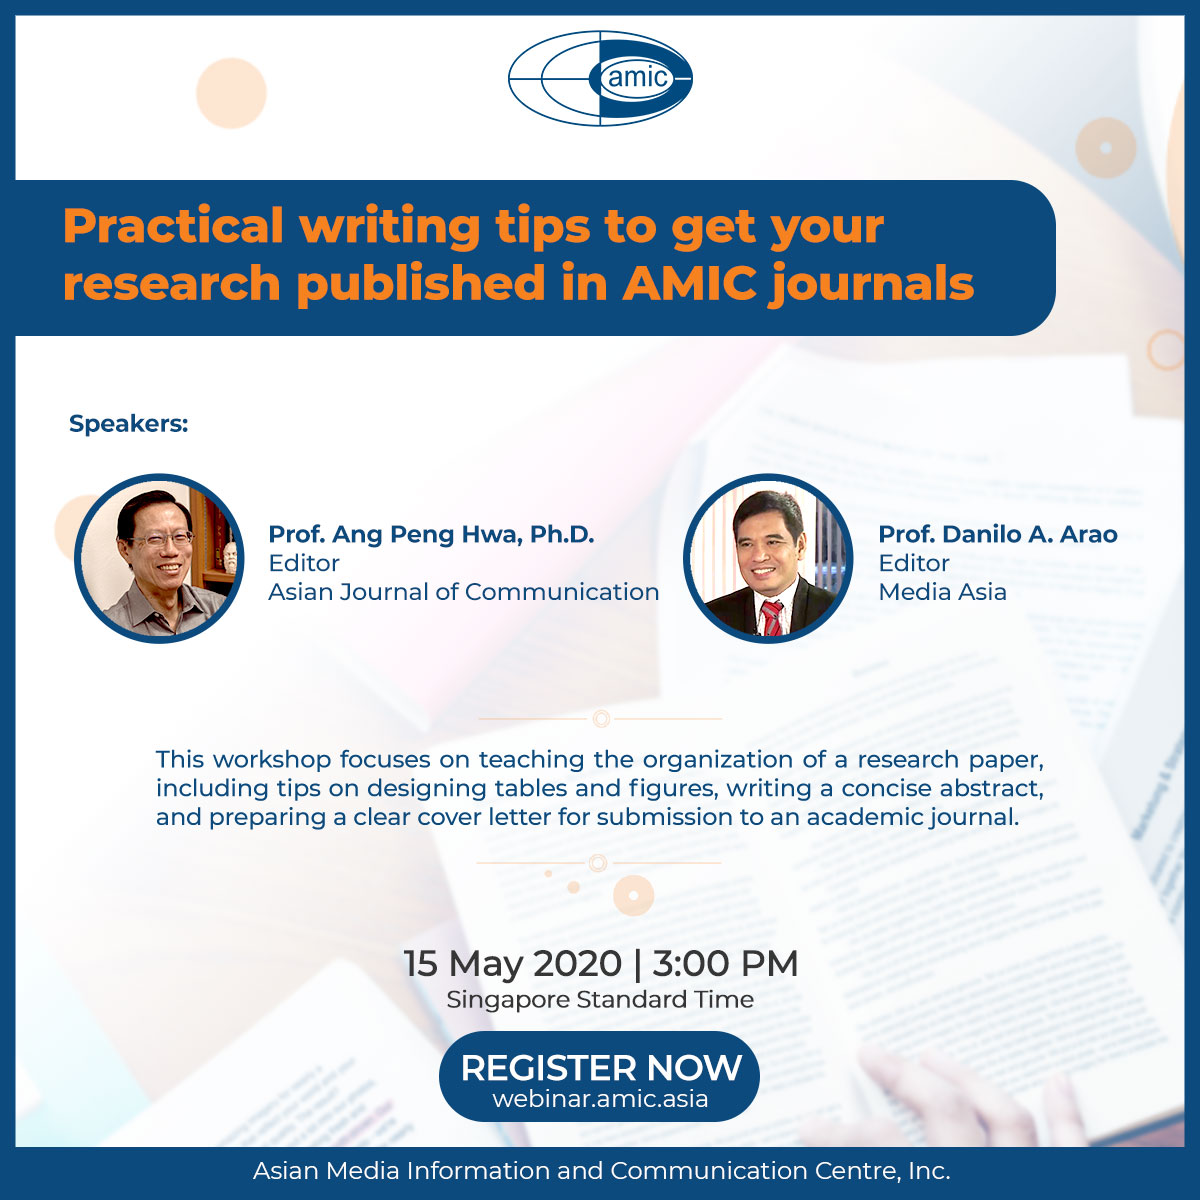 This 1-hour webinar prepares young and promising scholars with practical and valuable techniques when submitting a manuscript for peer-review academic journals. Register here: webinar.amic.asia
#webinar #journalpublishing #MediaAsia #AsianJournalofCommunication